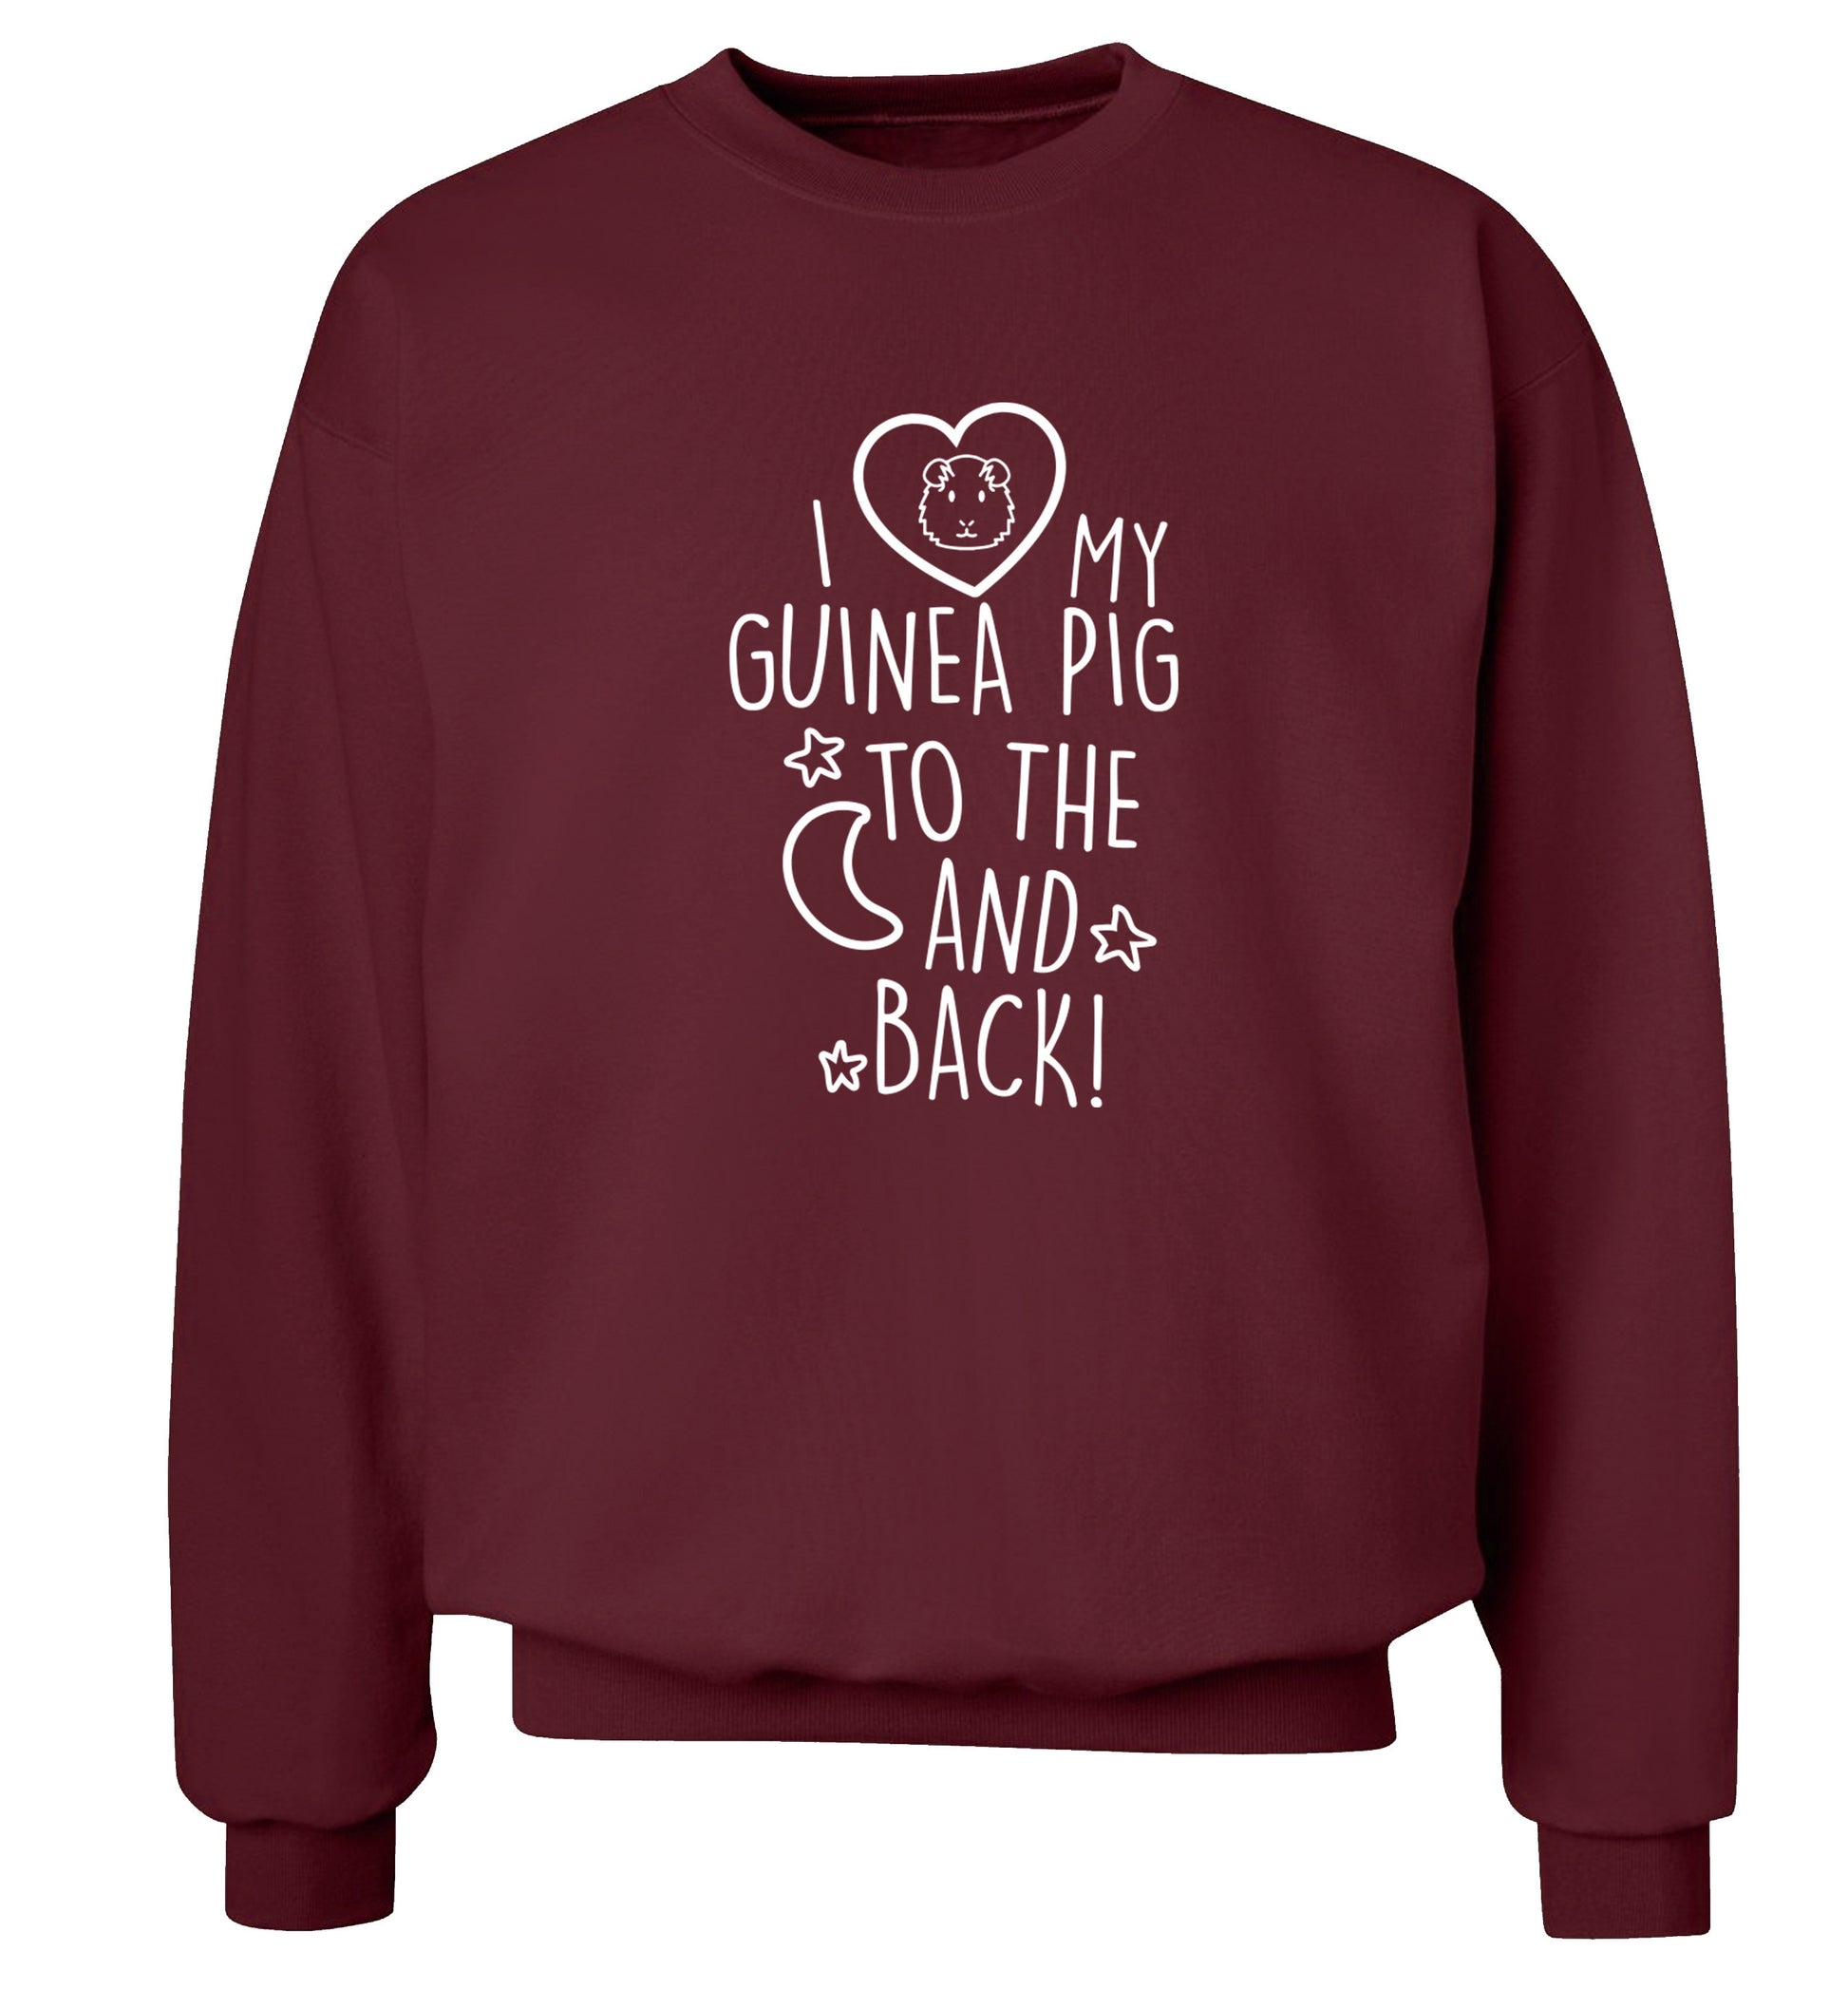 I love my guinea pig to the moon and back Adult's unisex maroon  sweater 2XL